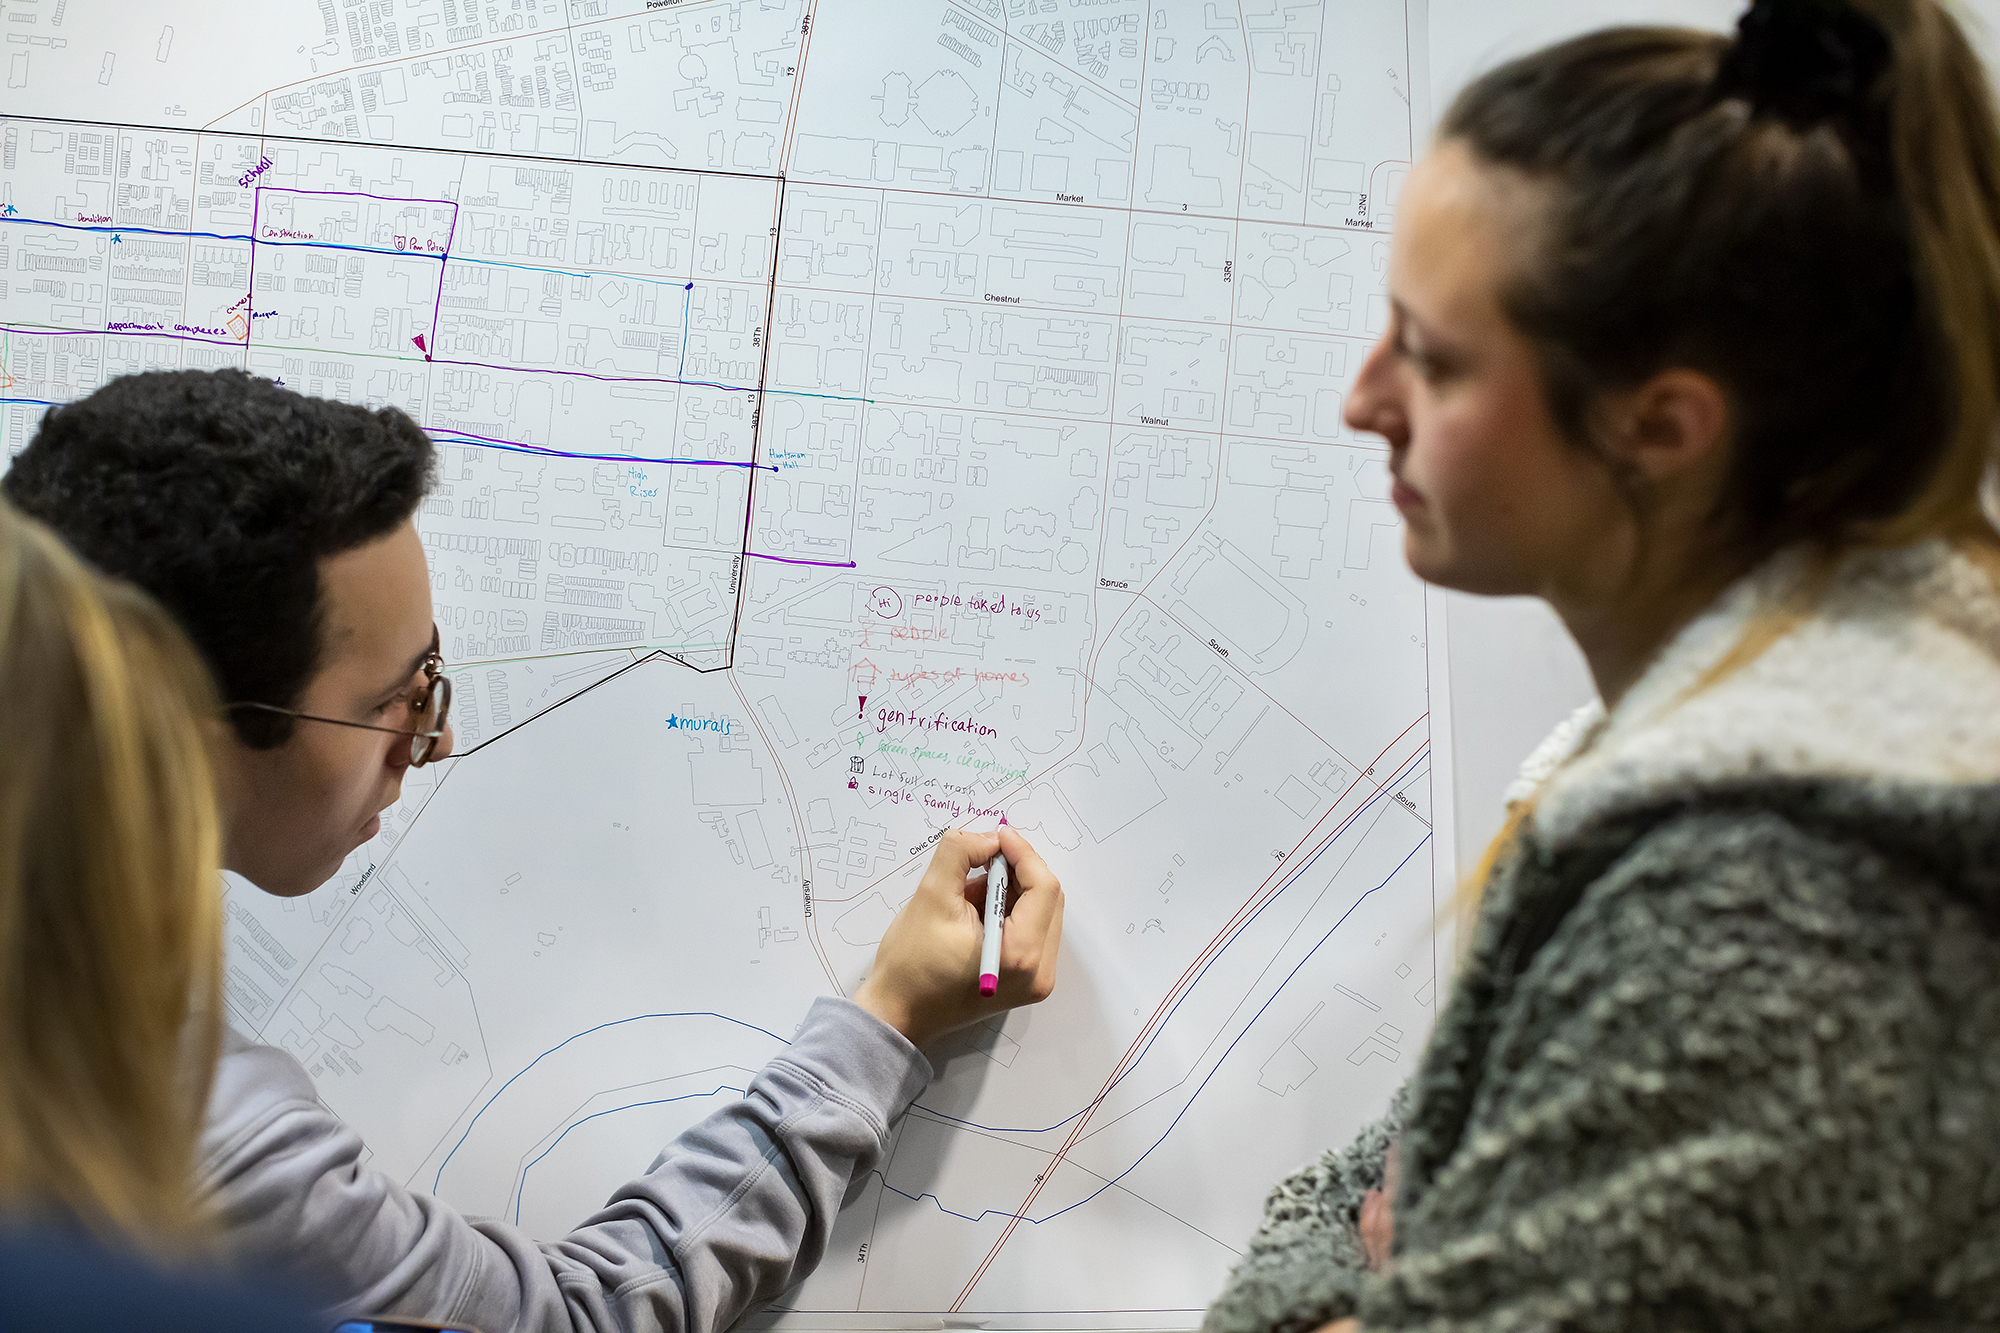 Penn students mapping what they saw in West Philadelphia